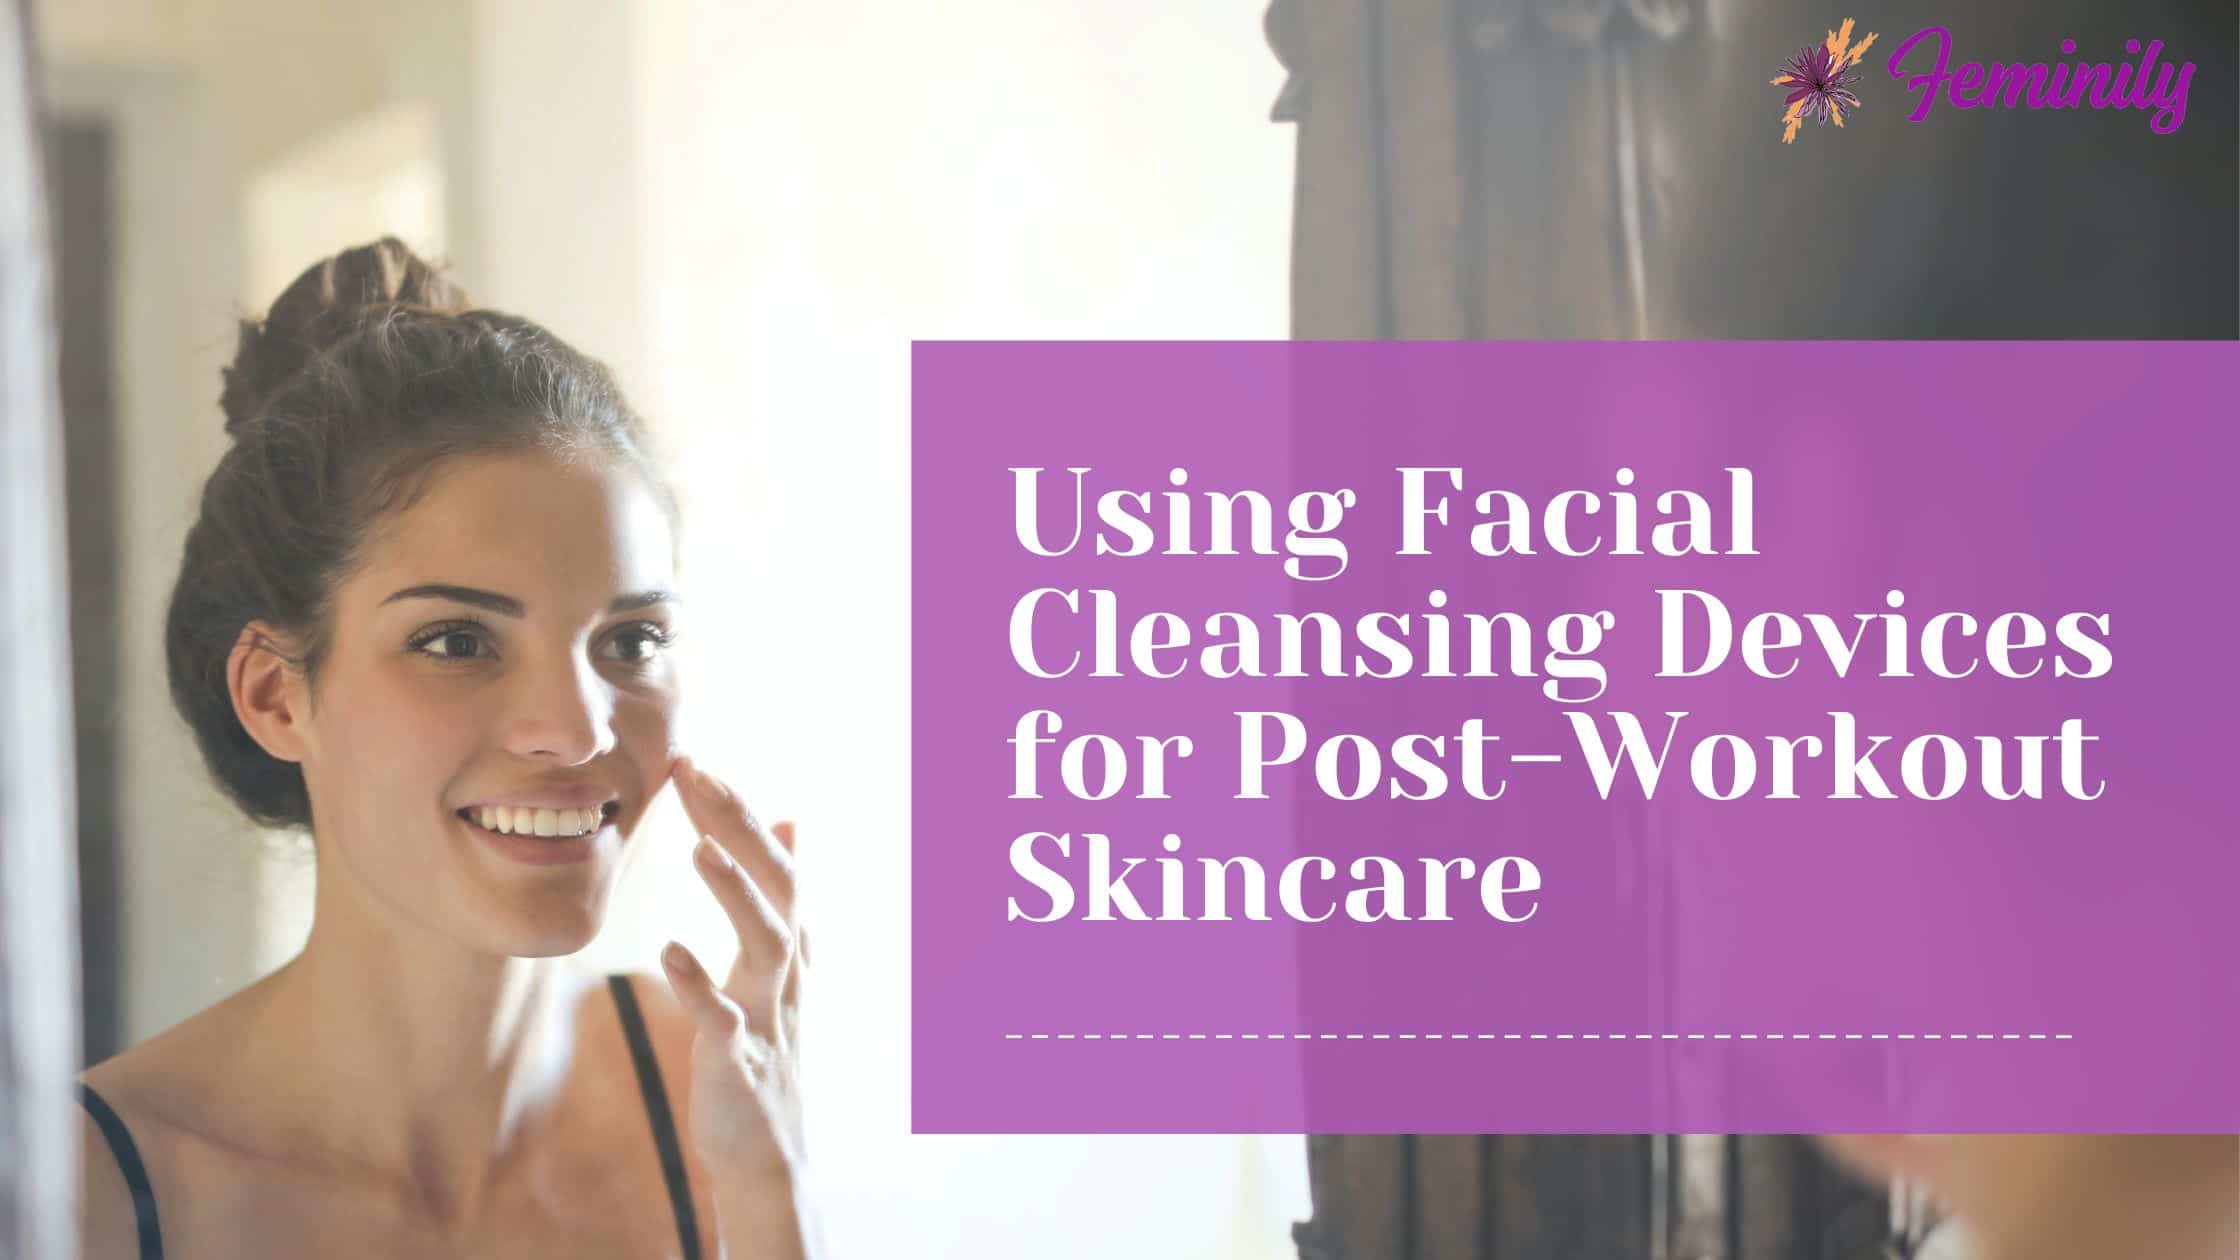 Using facial cleansing devices for post-workout skincare